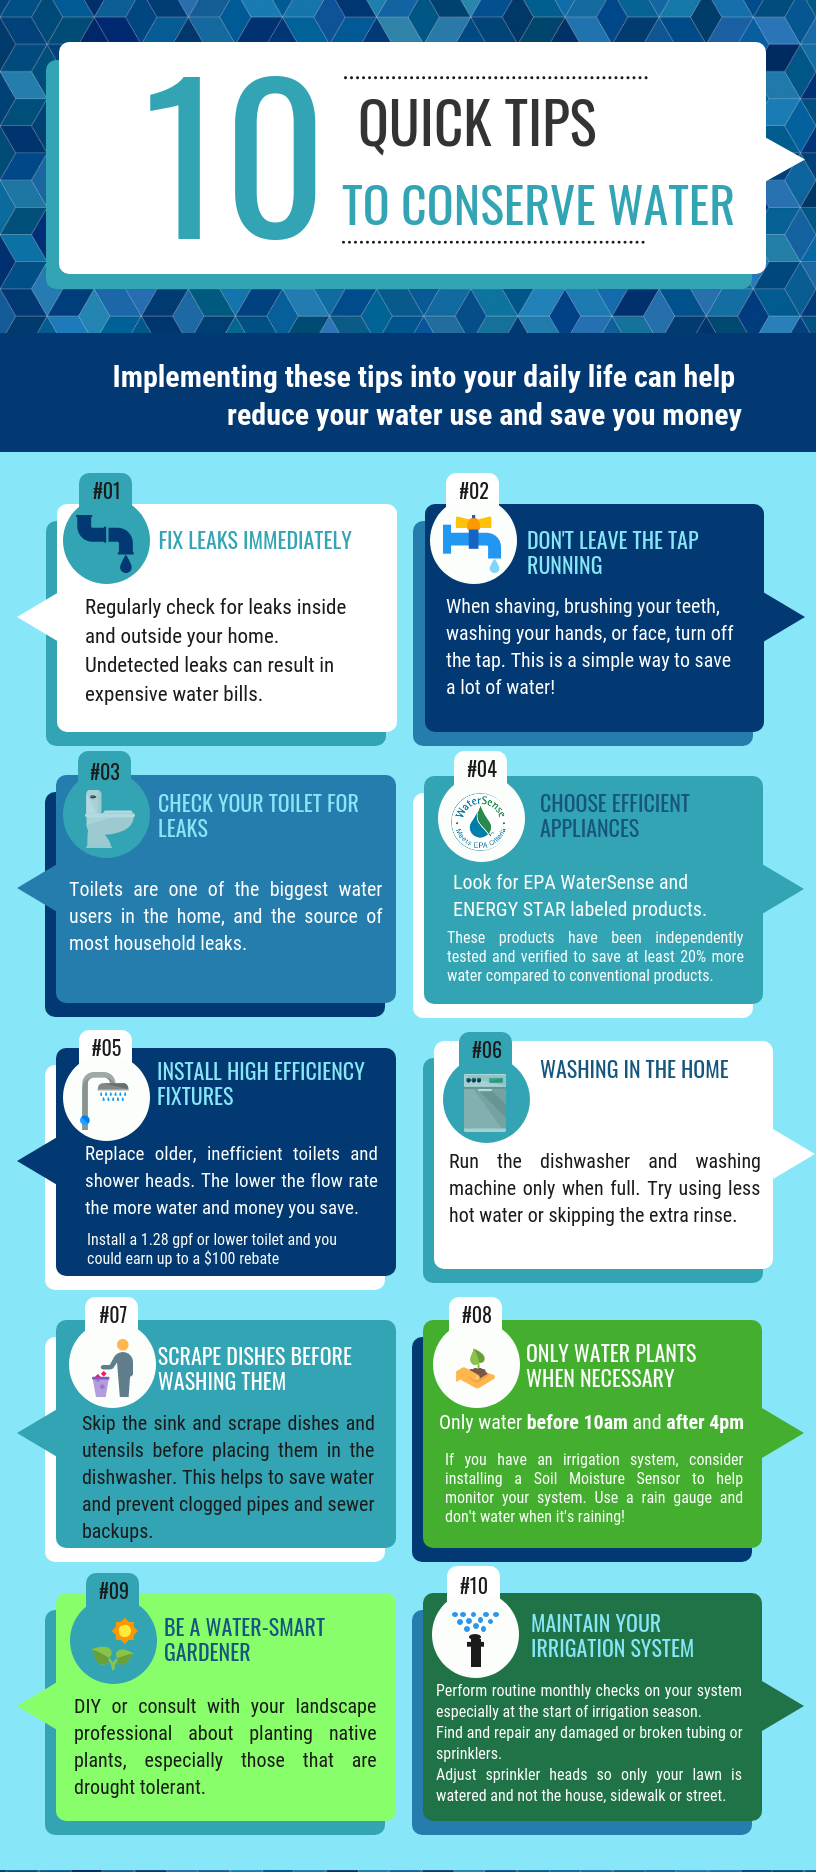 10-quick-tips-to-conserve-water-harris-county-municipal-utility